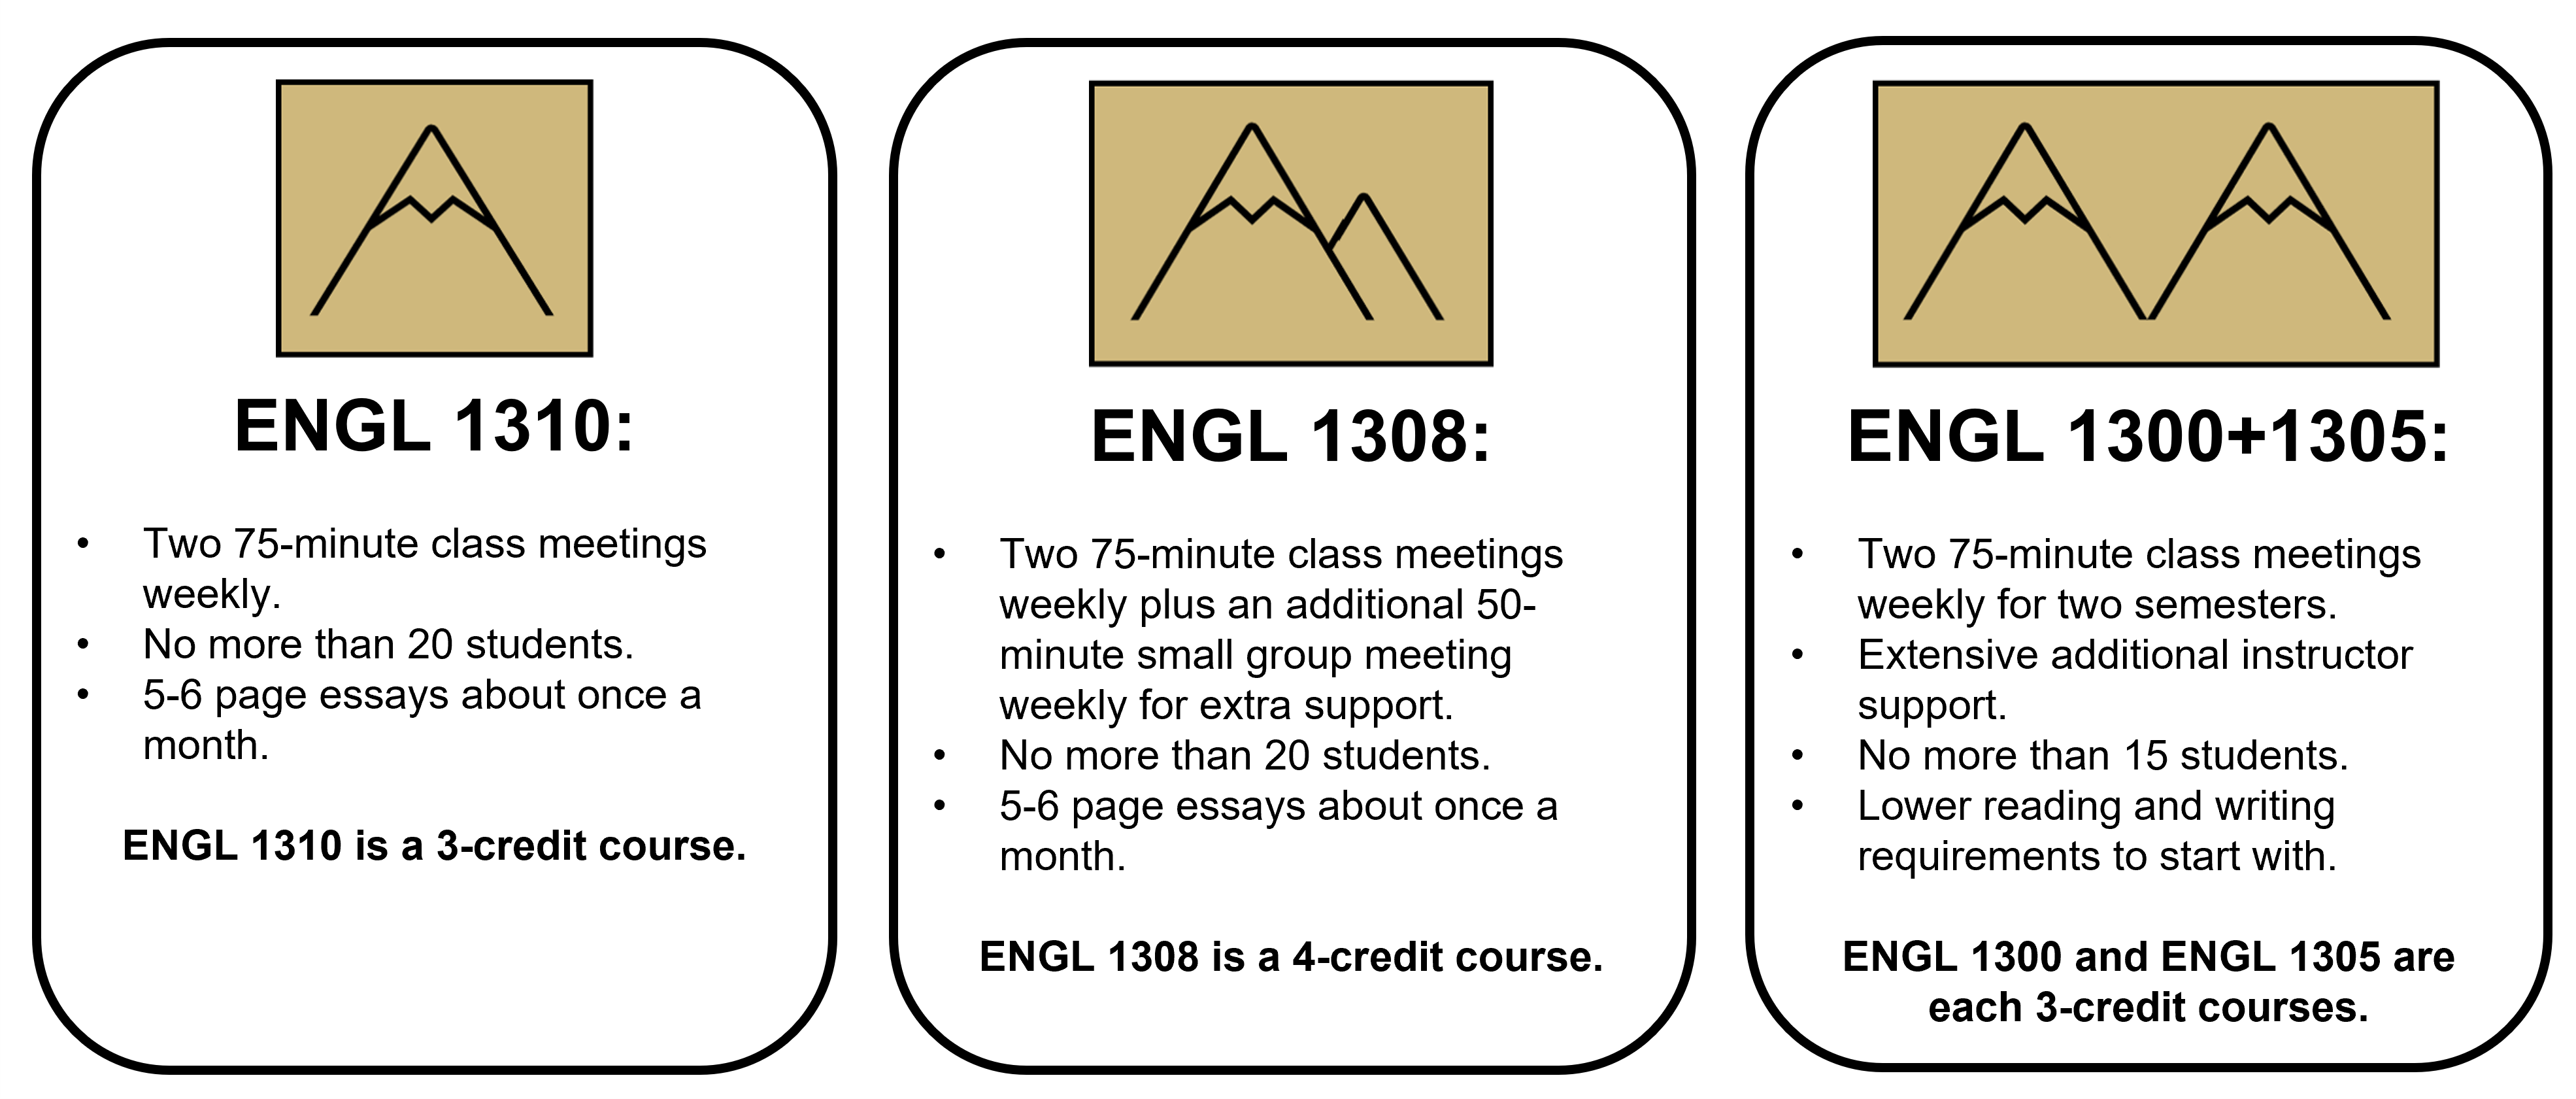 ENGL 1310: Two 75-minute class meetings weekly. No more than 20 students. 5-6 page essays about once a month. ENGL 1310 is a 3-credit course. ENGL 1308: Two 75-minute class meetings weekly plus an additional 50-minute small group meeting weekly for extra support. No more than 20 students. 5-6 page essays about once a month. ENGL 1308 is a 4-credit course. ENGL 1300+1305: Two 75-minute class meetings weekly for two semesters. Extensive additional instructor support. No more than 15 students. Lower reading and writing requirements to start with. ENGL 1300 and ENGL 1305 are each 3-credit courses.